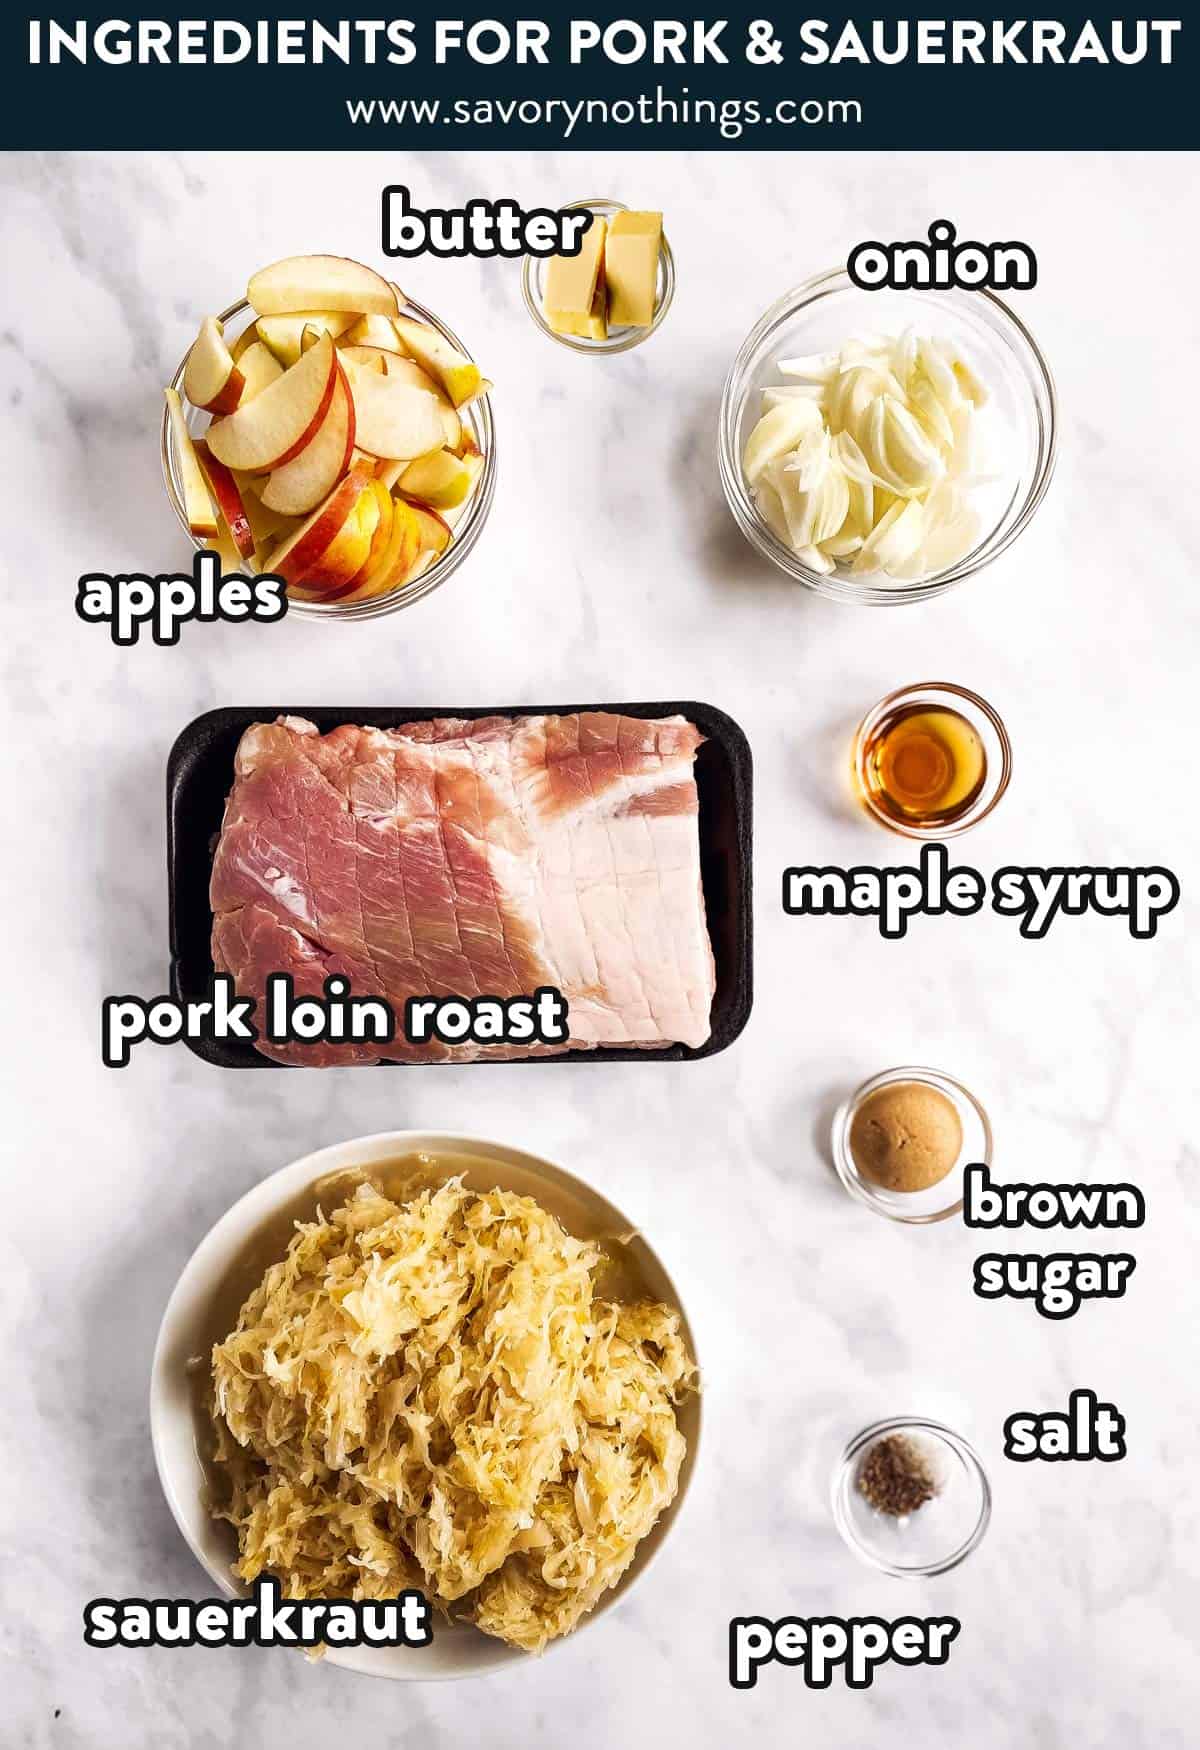 ingredients for pork and sauerkraut with text labels